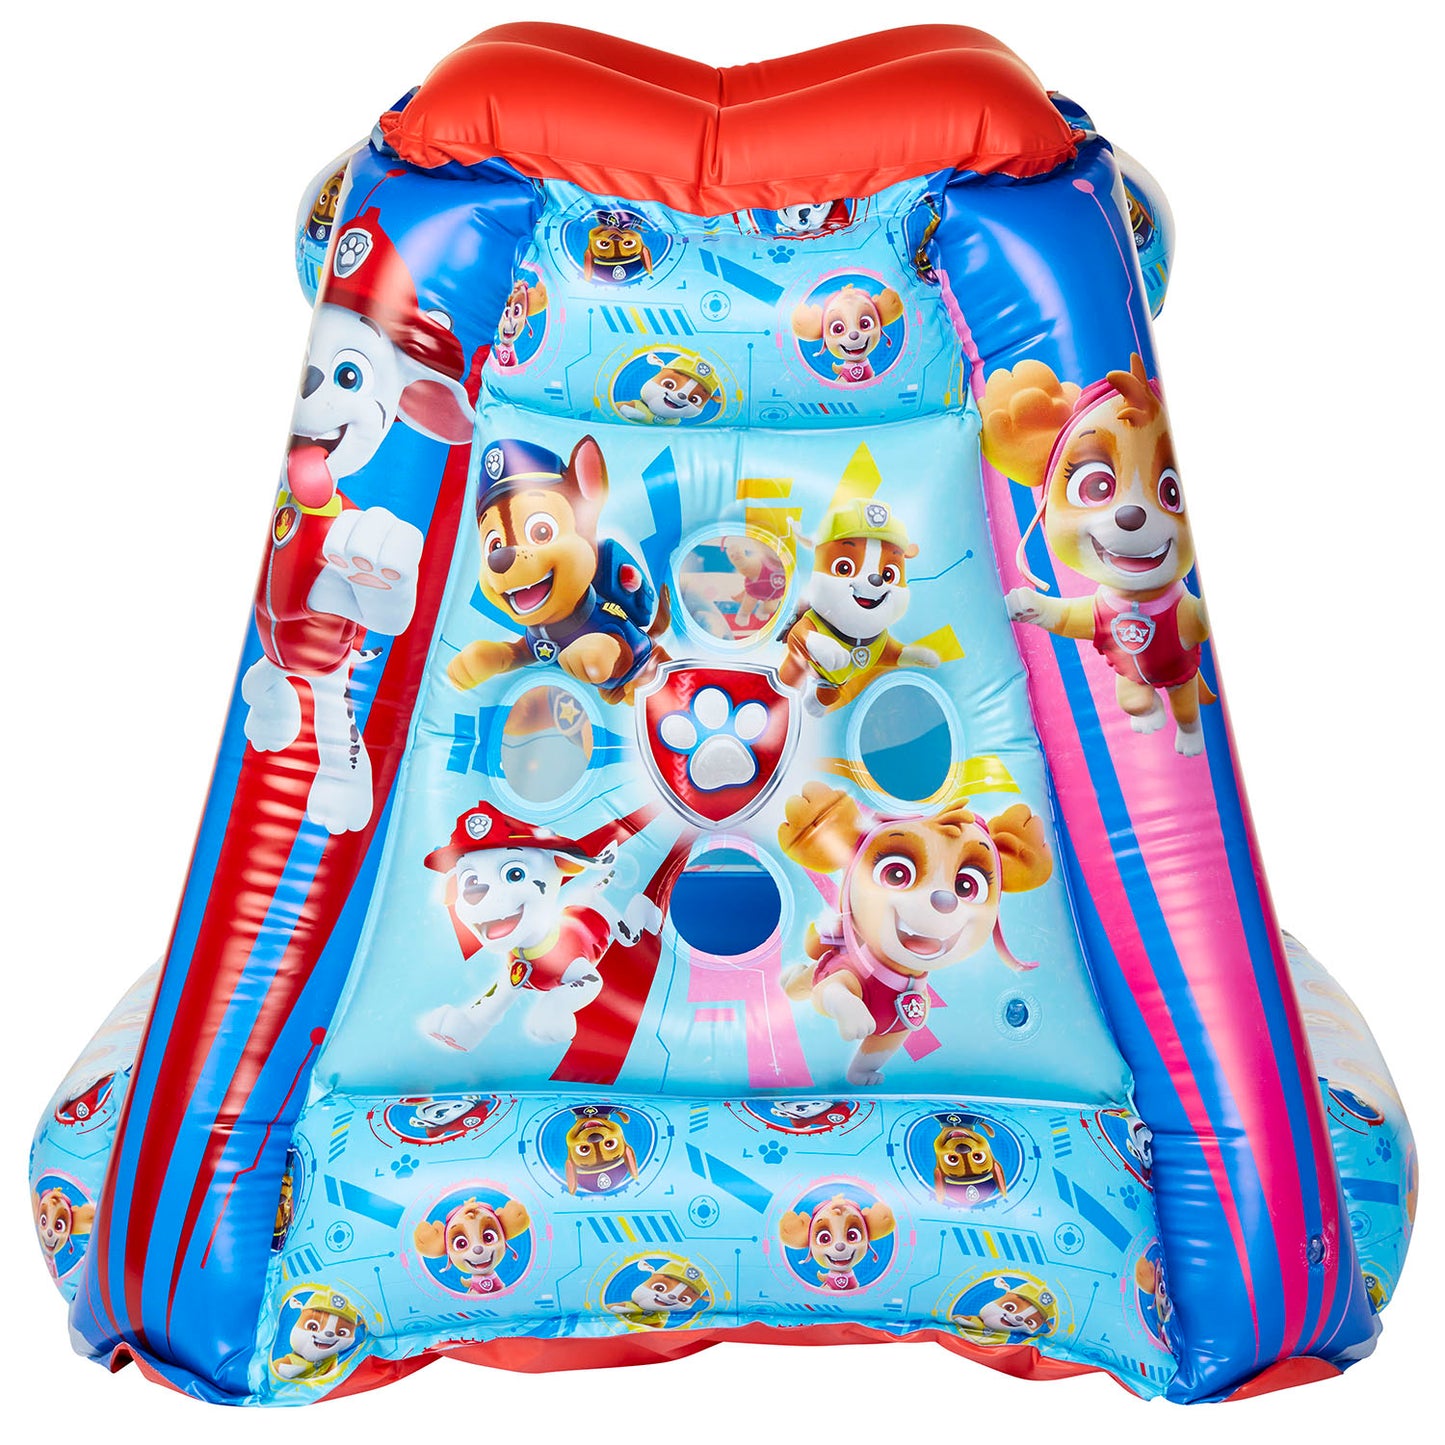 Paw Patrol Inflatable Playland Ballpit with 100 Soft Flex Balls